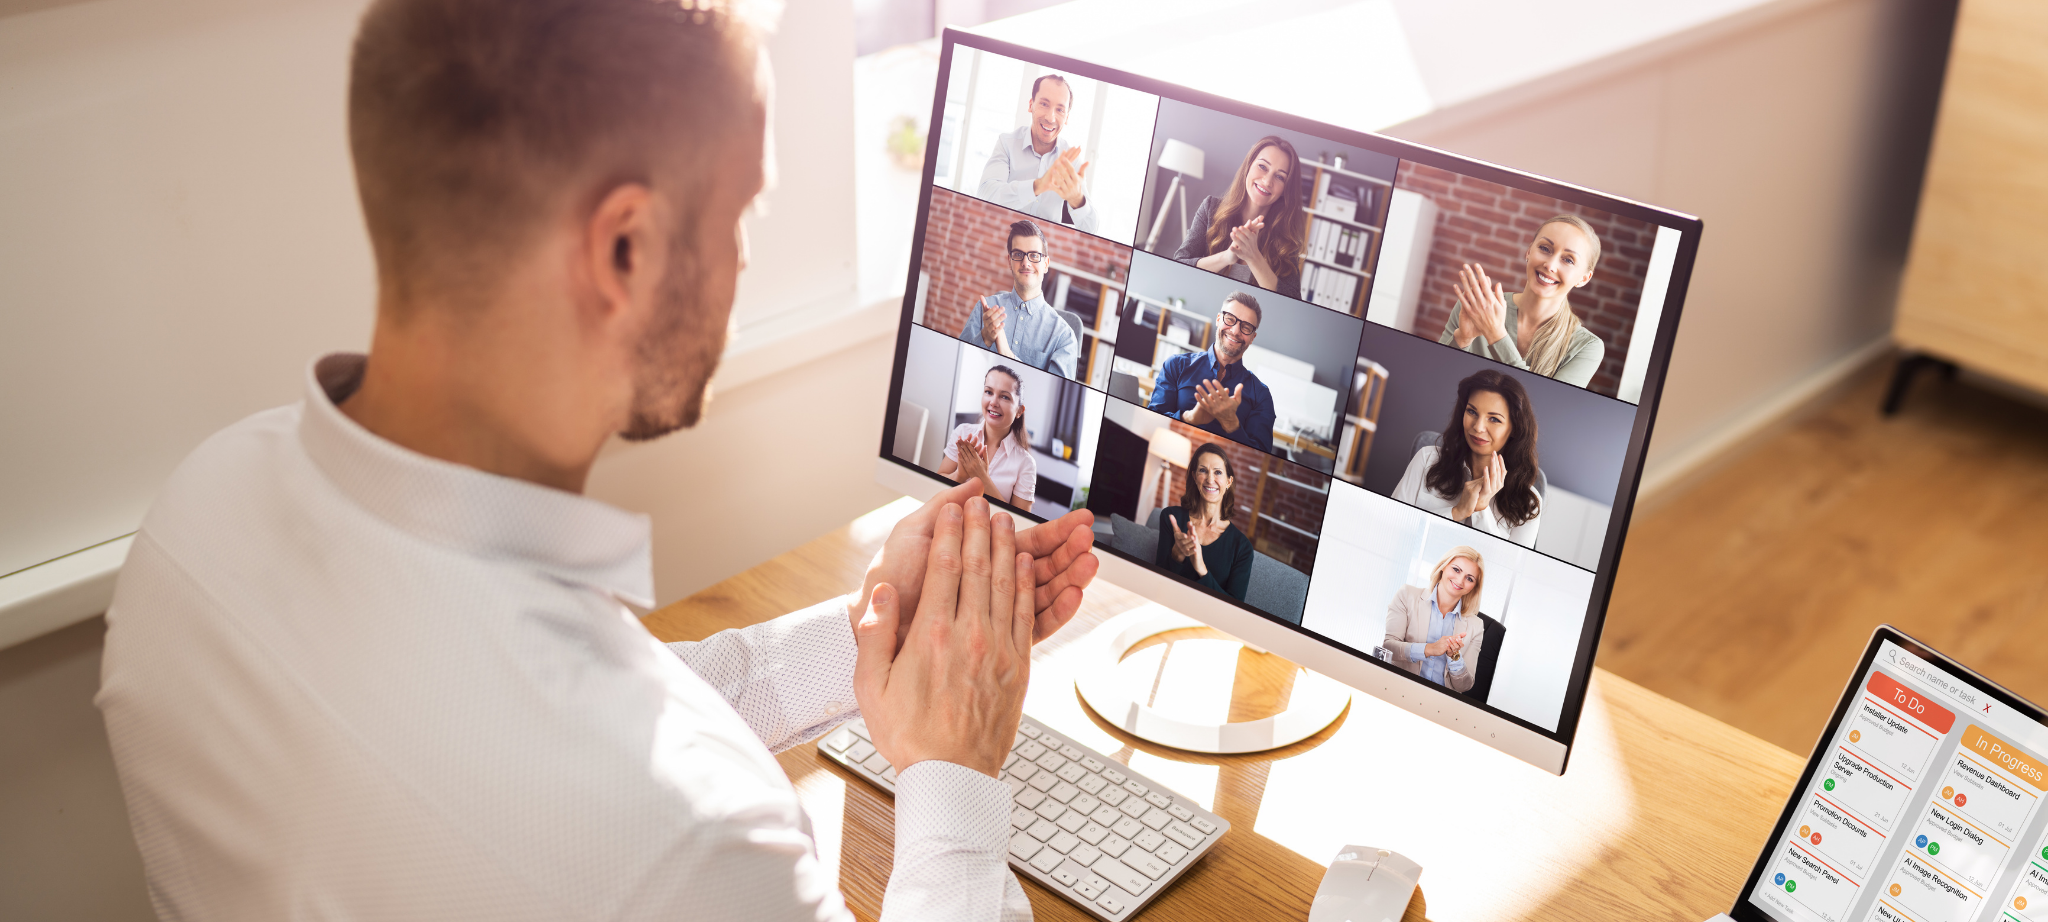 How to host a successful virtual event